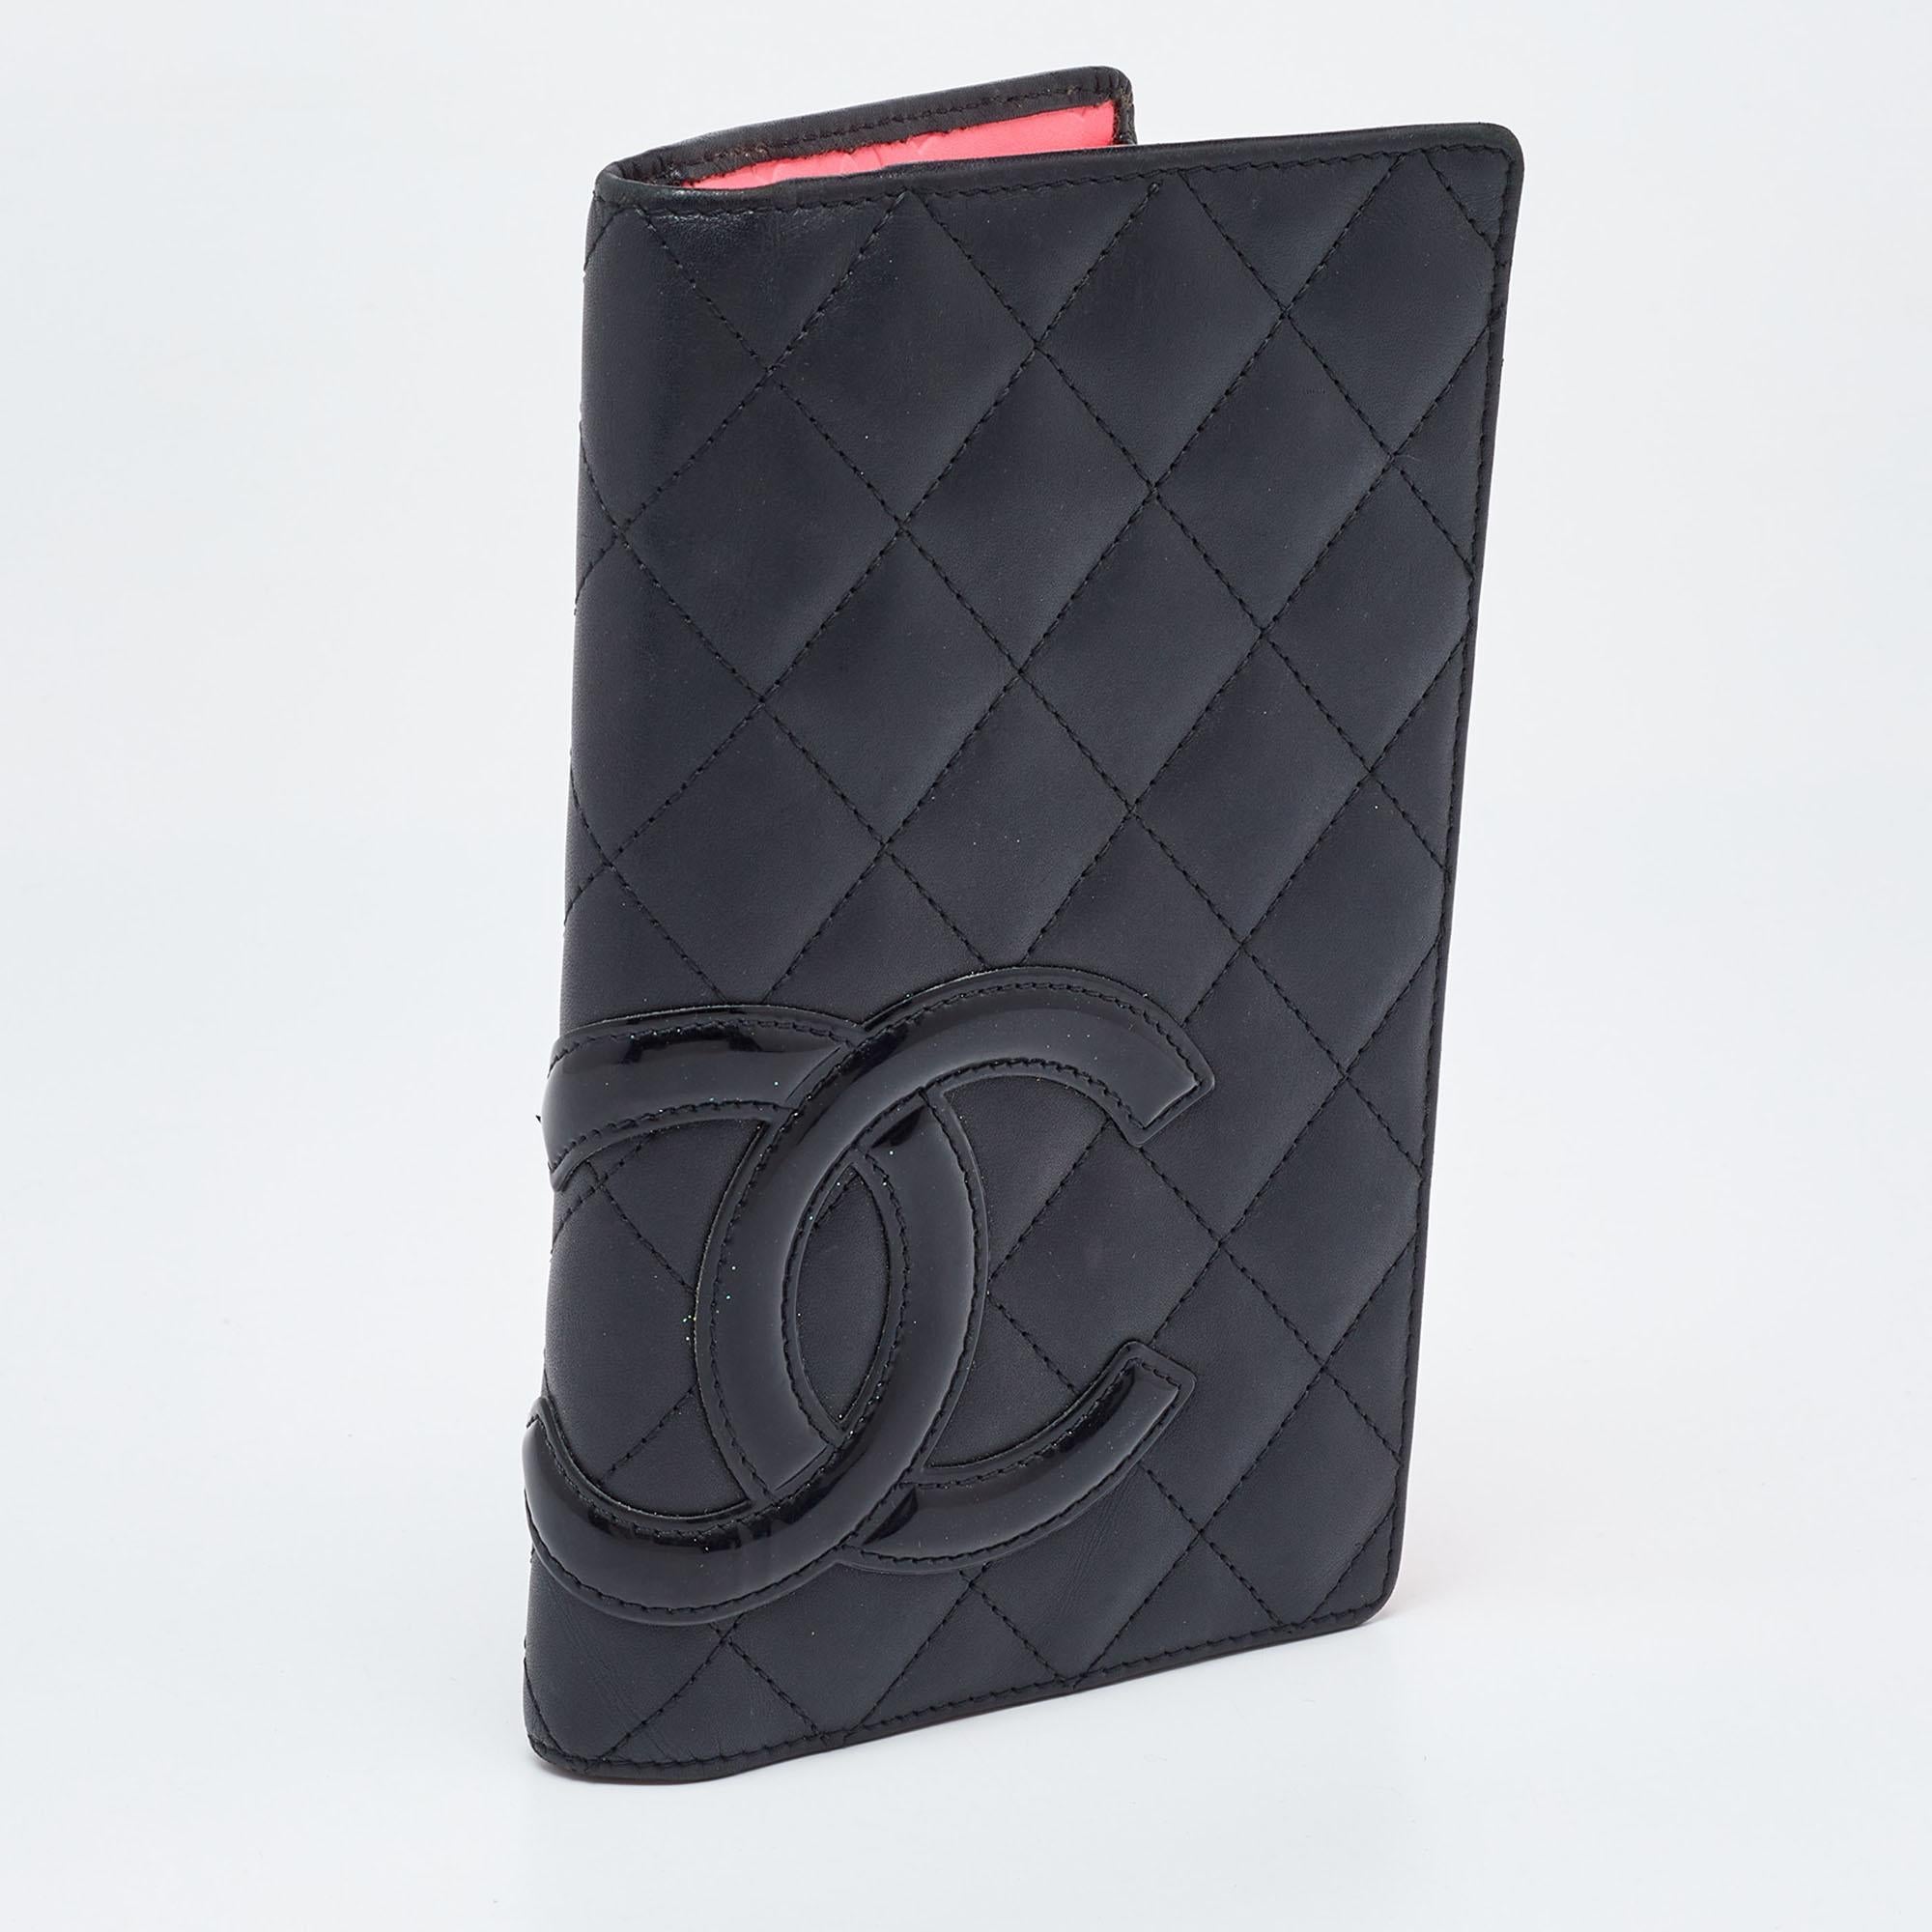 Chanel Black Quilted Leather Cambon Ligne Bifold Wallet In Good Condition For Sale In Dubai, Al Qouz 2